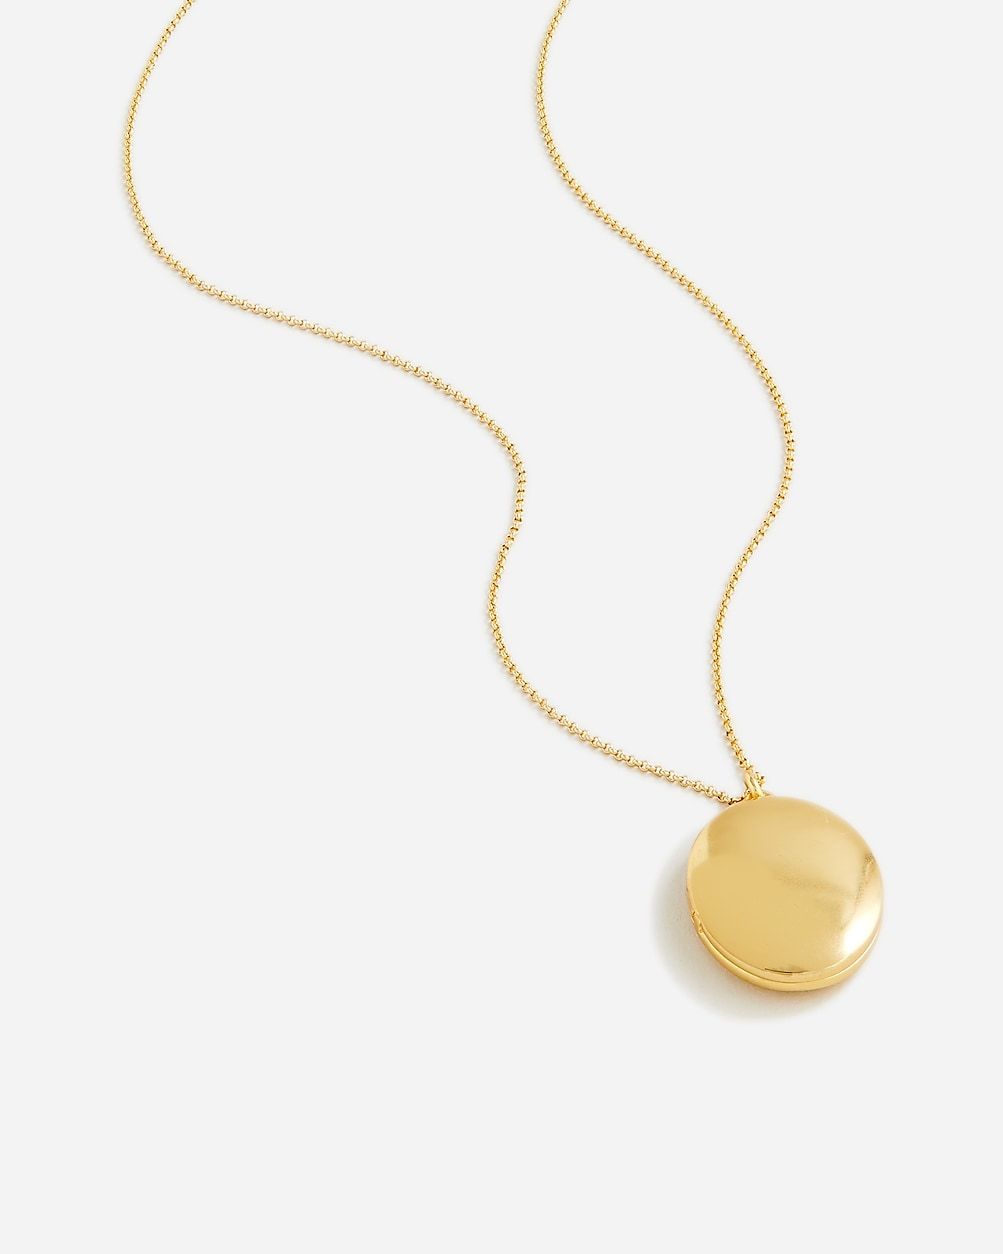 Dainty gold-plated oval locket necklace | J.Crew US